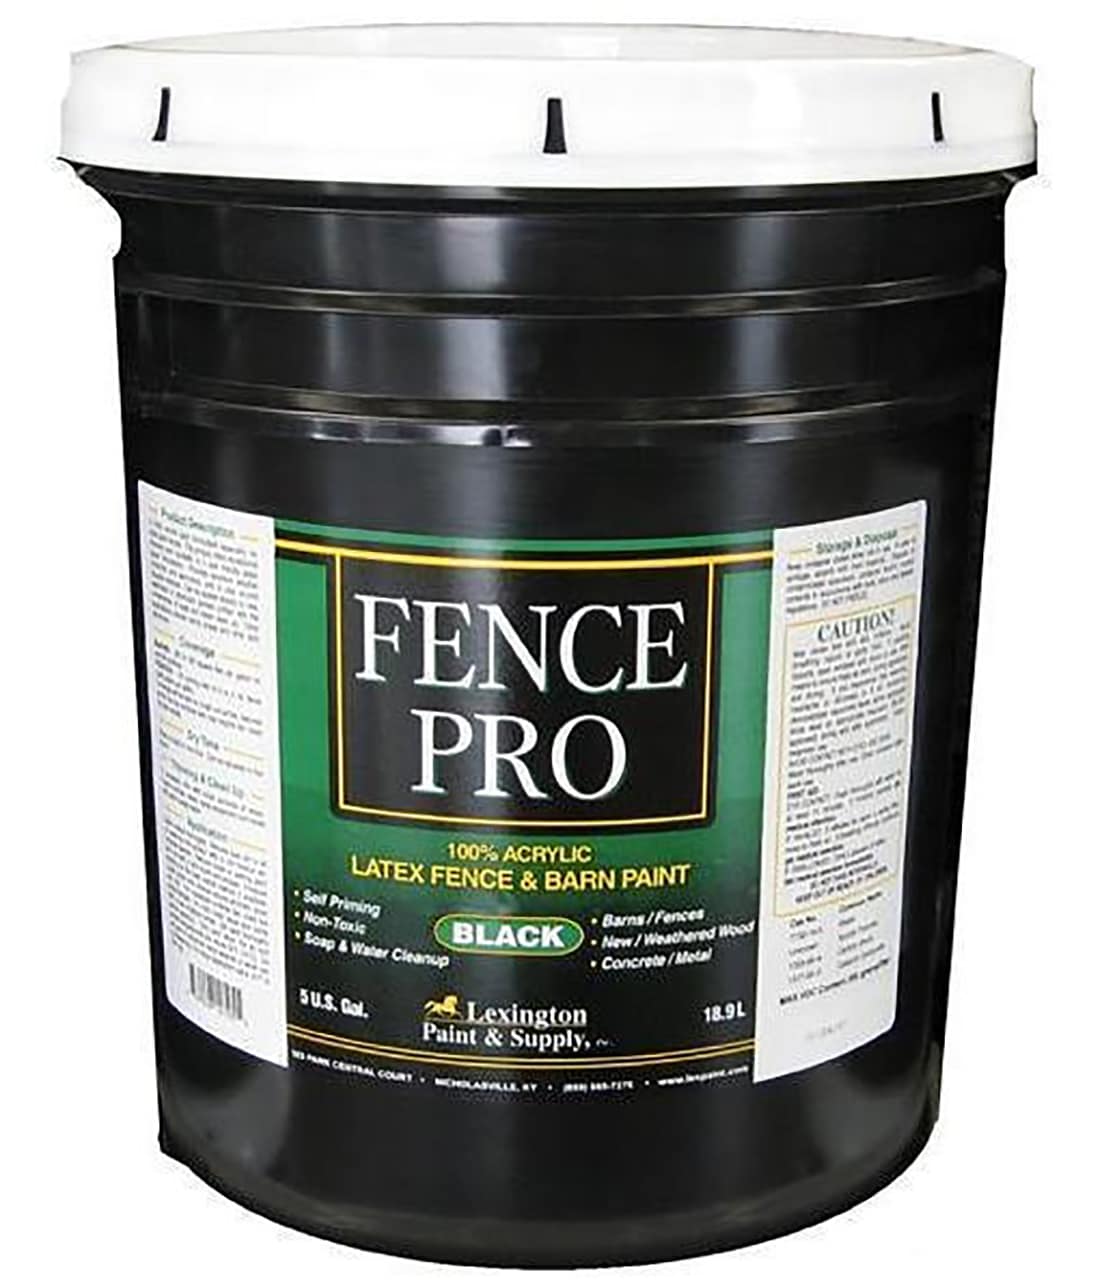 Galv-Pro Black Spray Paint Hi-Performance Enamel Color Match Glossy Acrylic  Touch-Up Aerosol Paint For Powder Coated Fence - 12 oz. Can (Black)